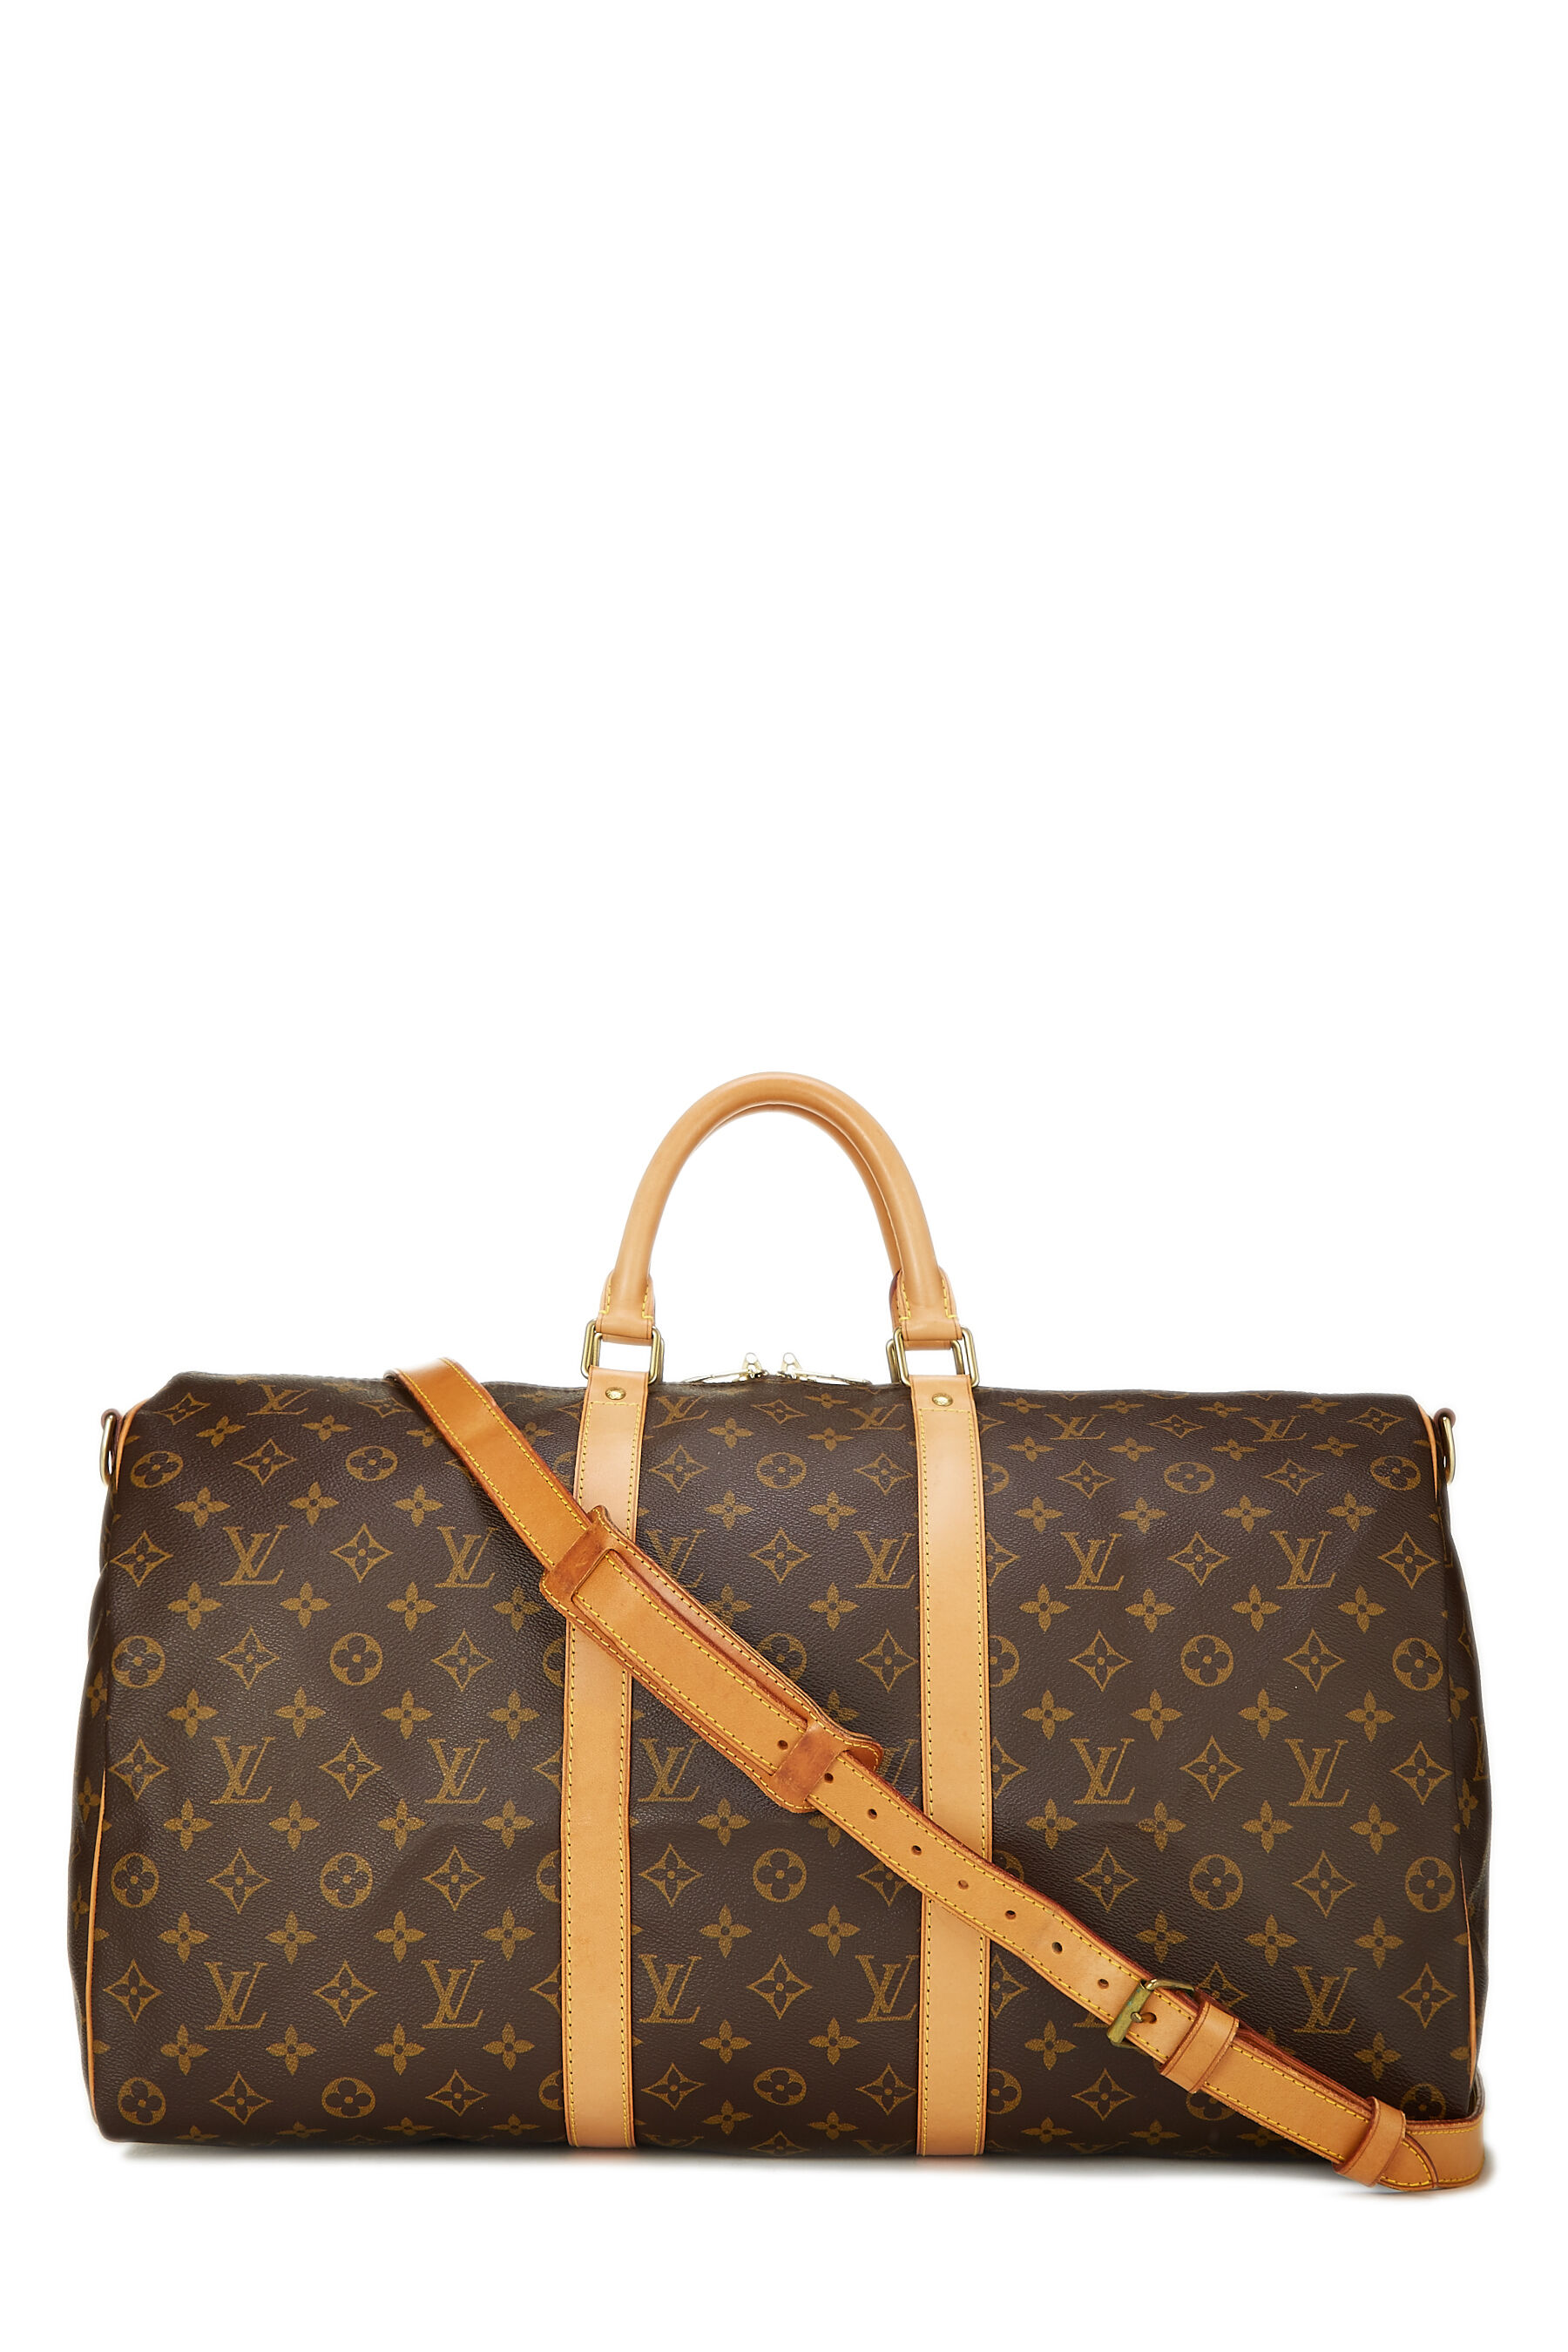 Shop for Louis Vuitton Monogram Canvas Leather Sac Flanerie 50 cm Shoulder  Bag - Shipped from USA